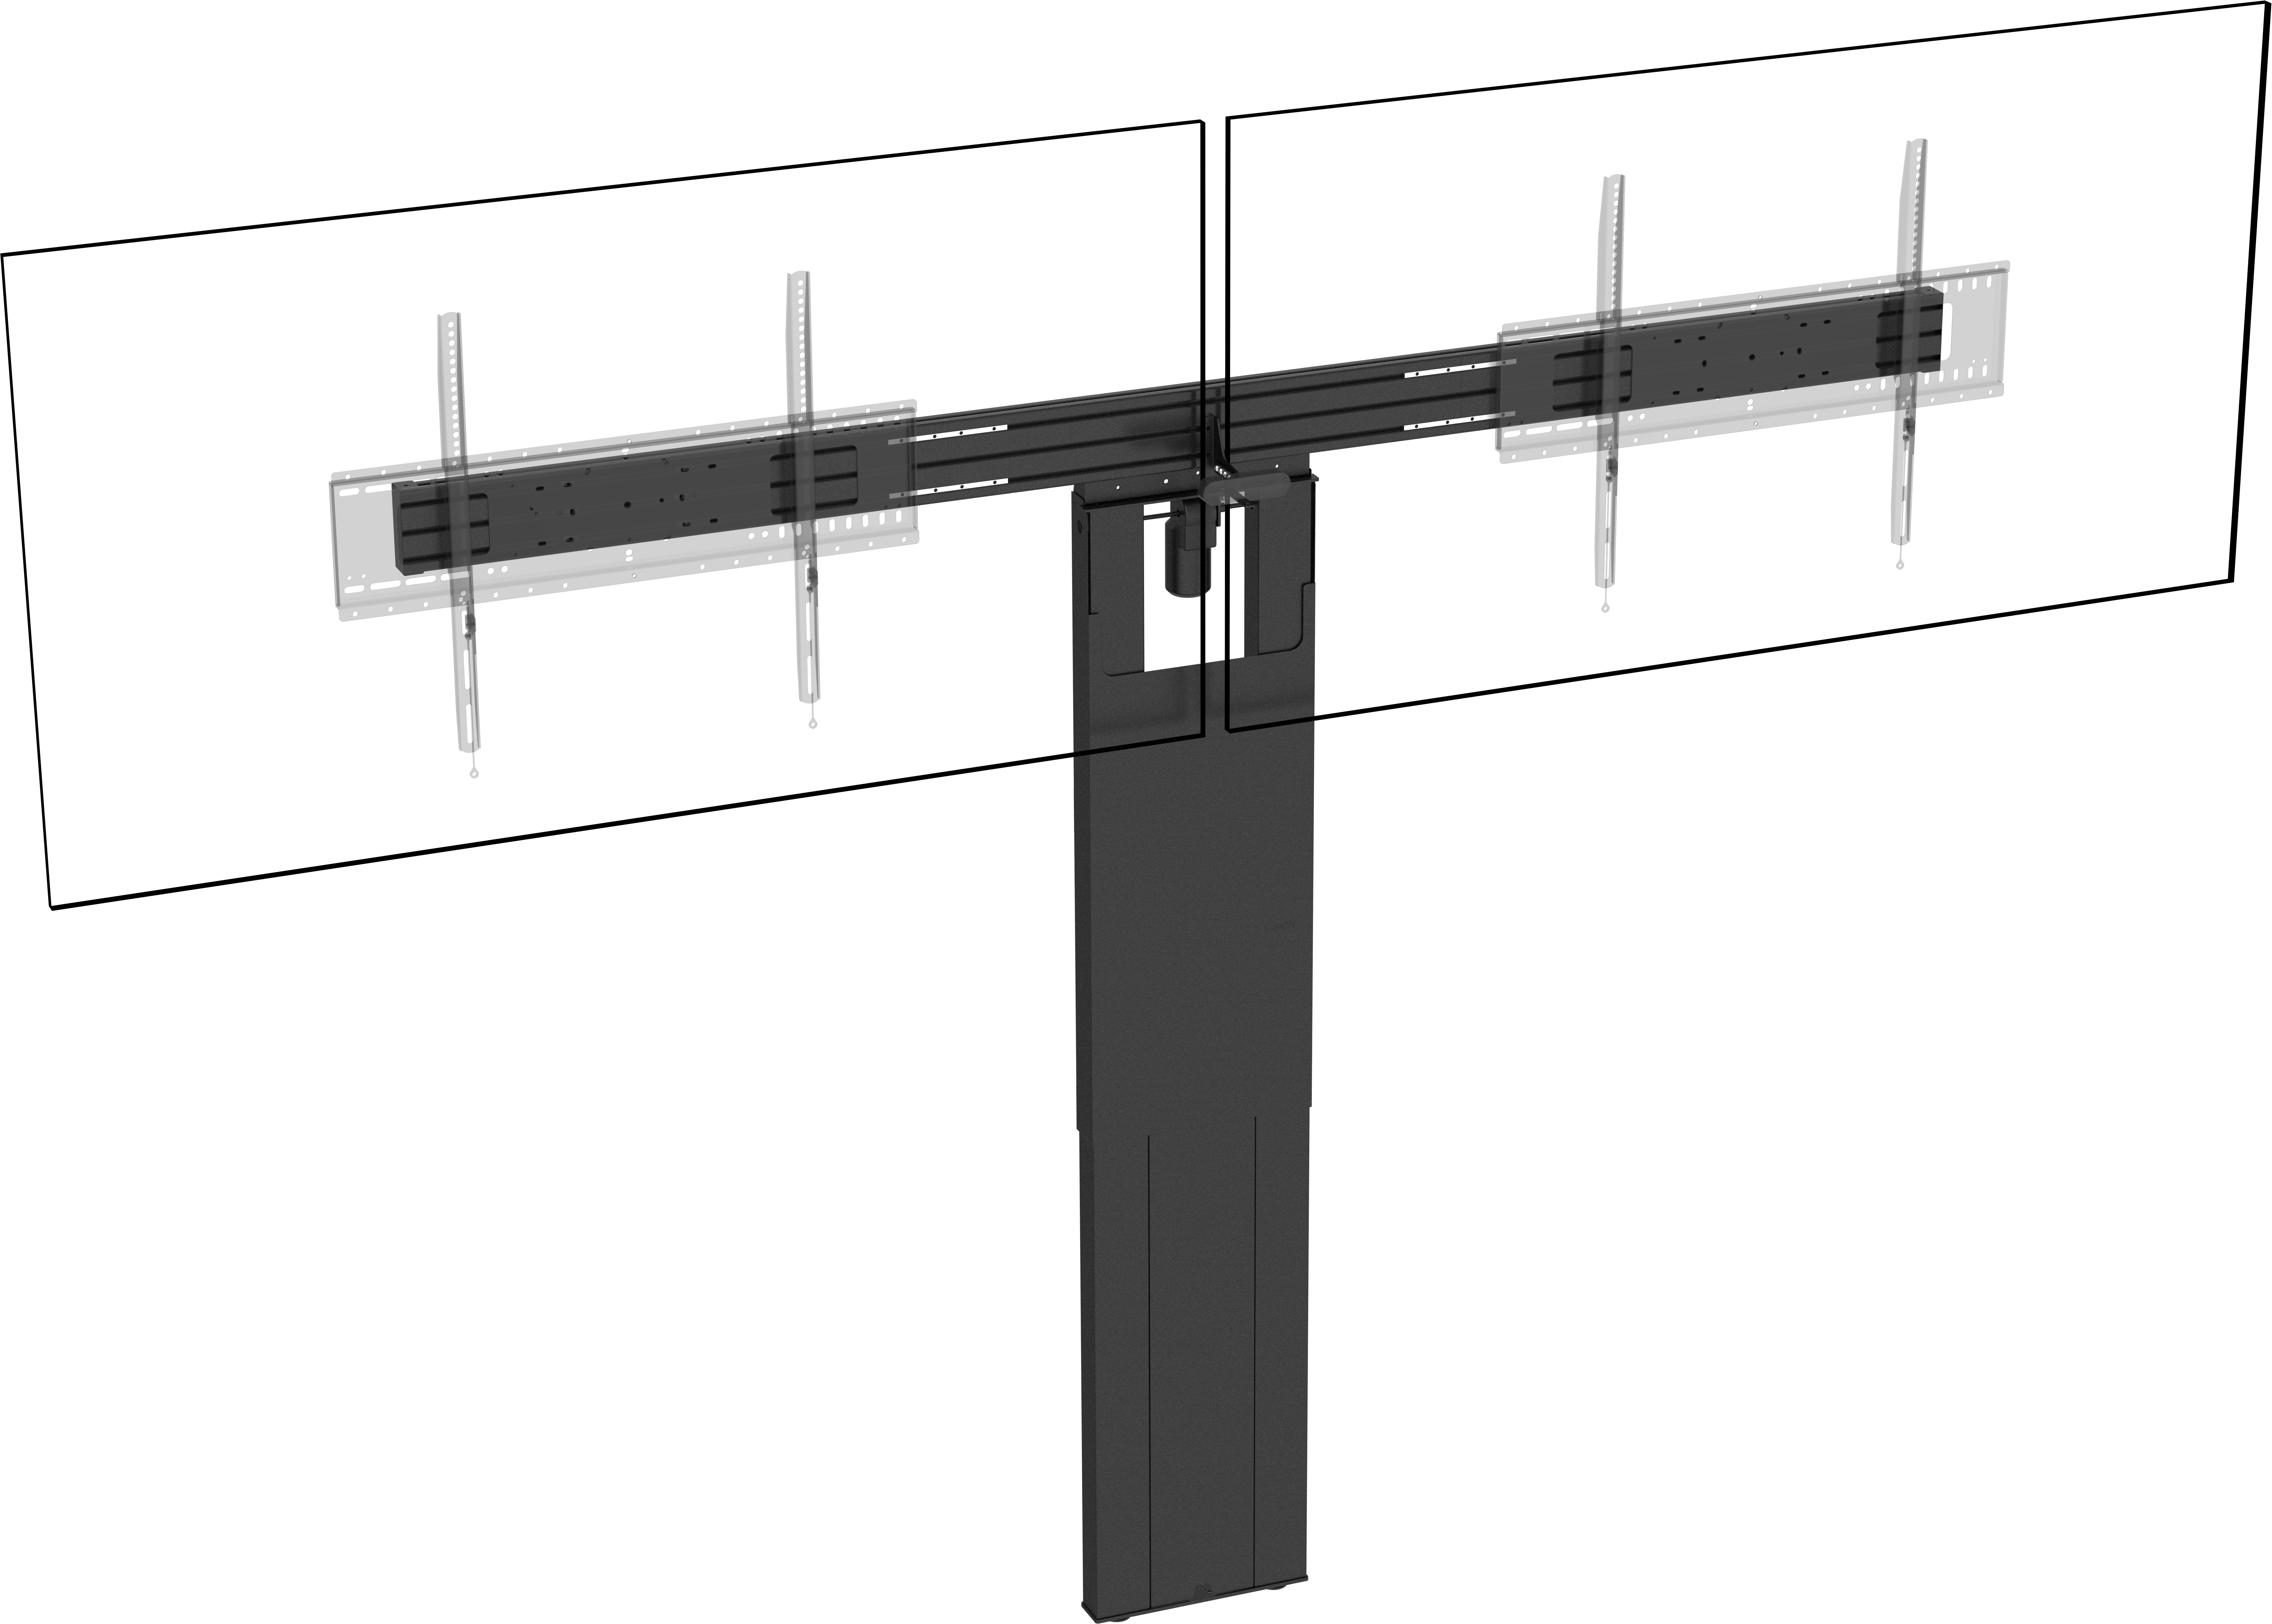 An image showing Motorised Dual Flat Panel Floor Stand